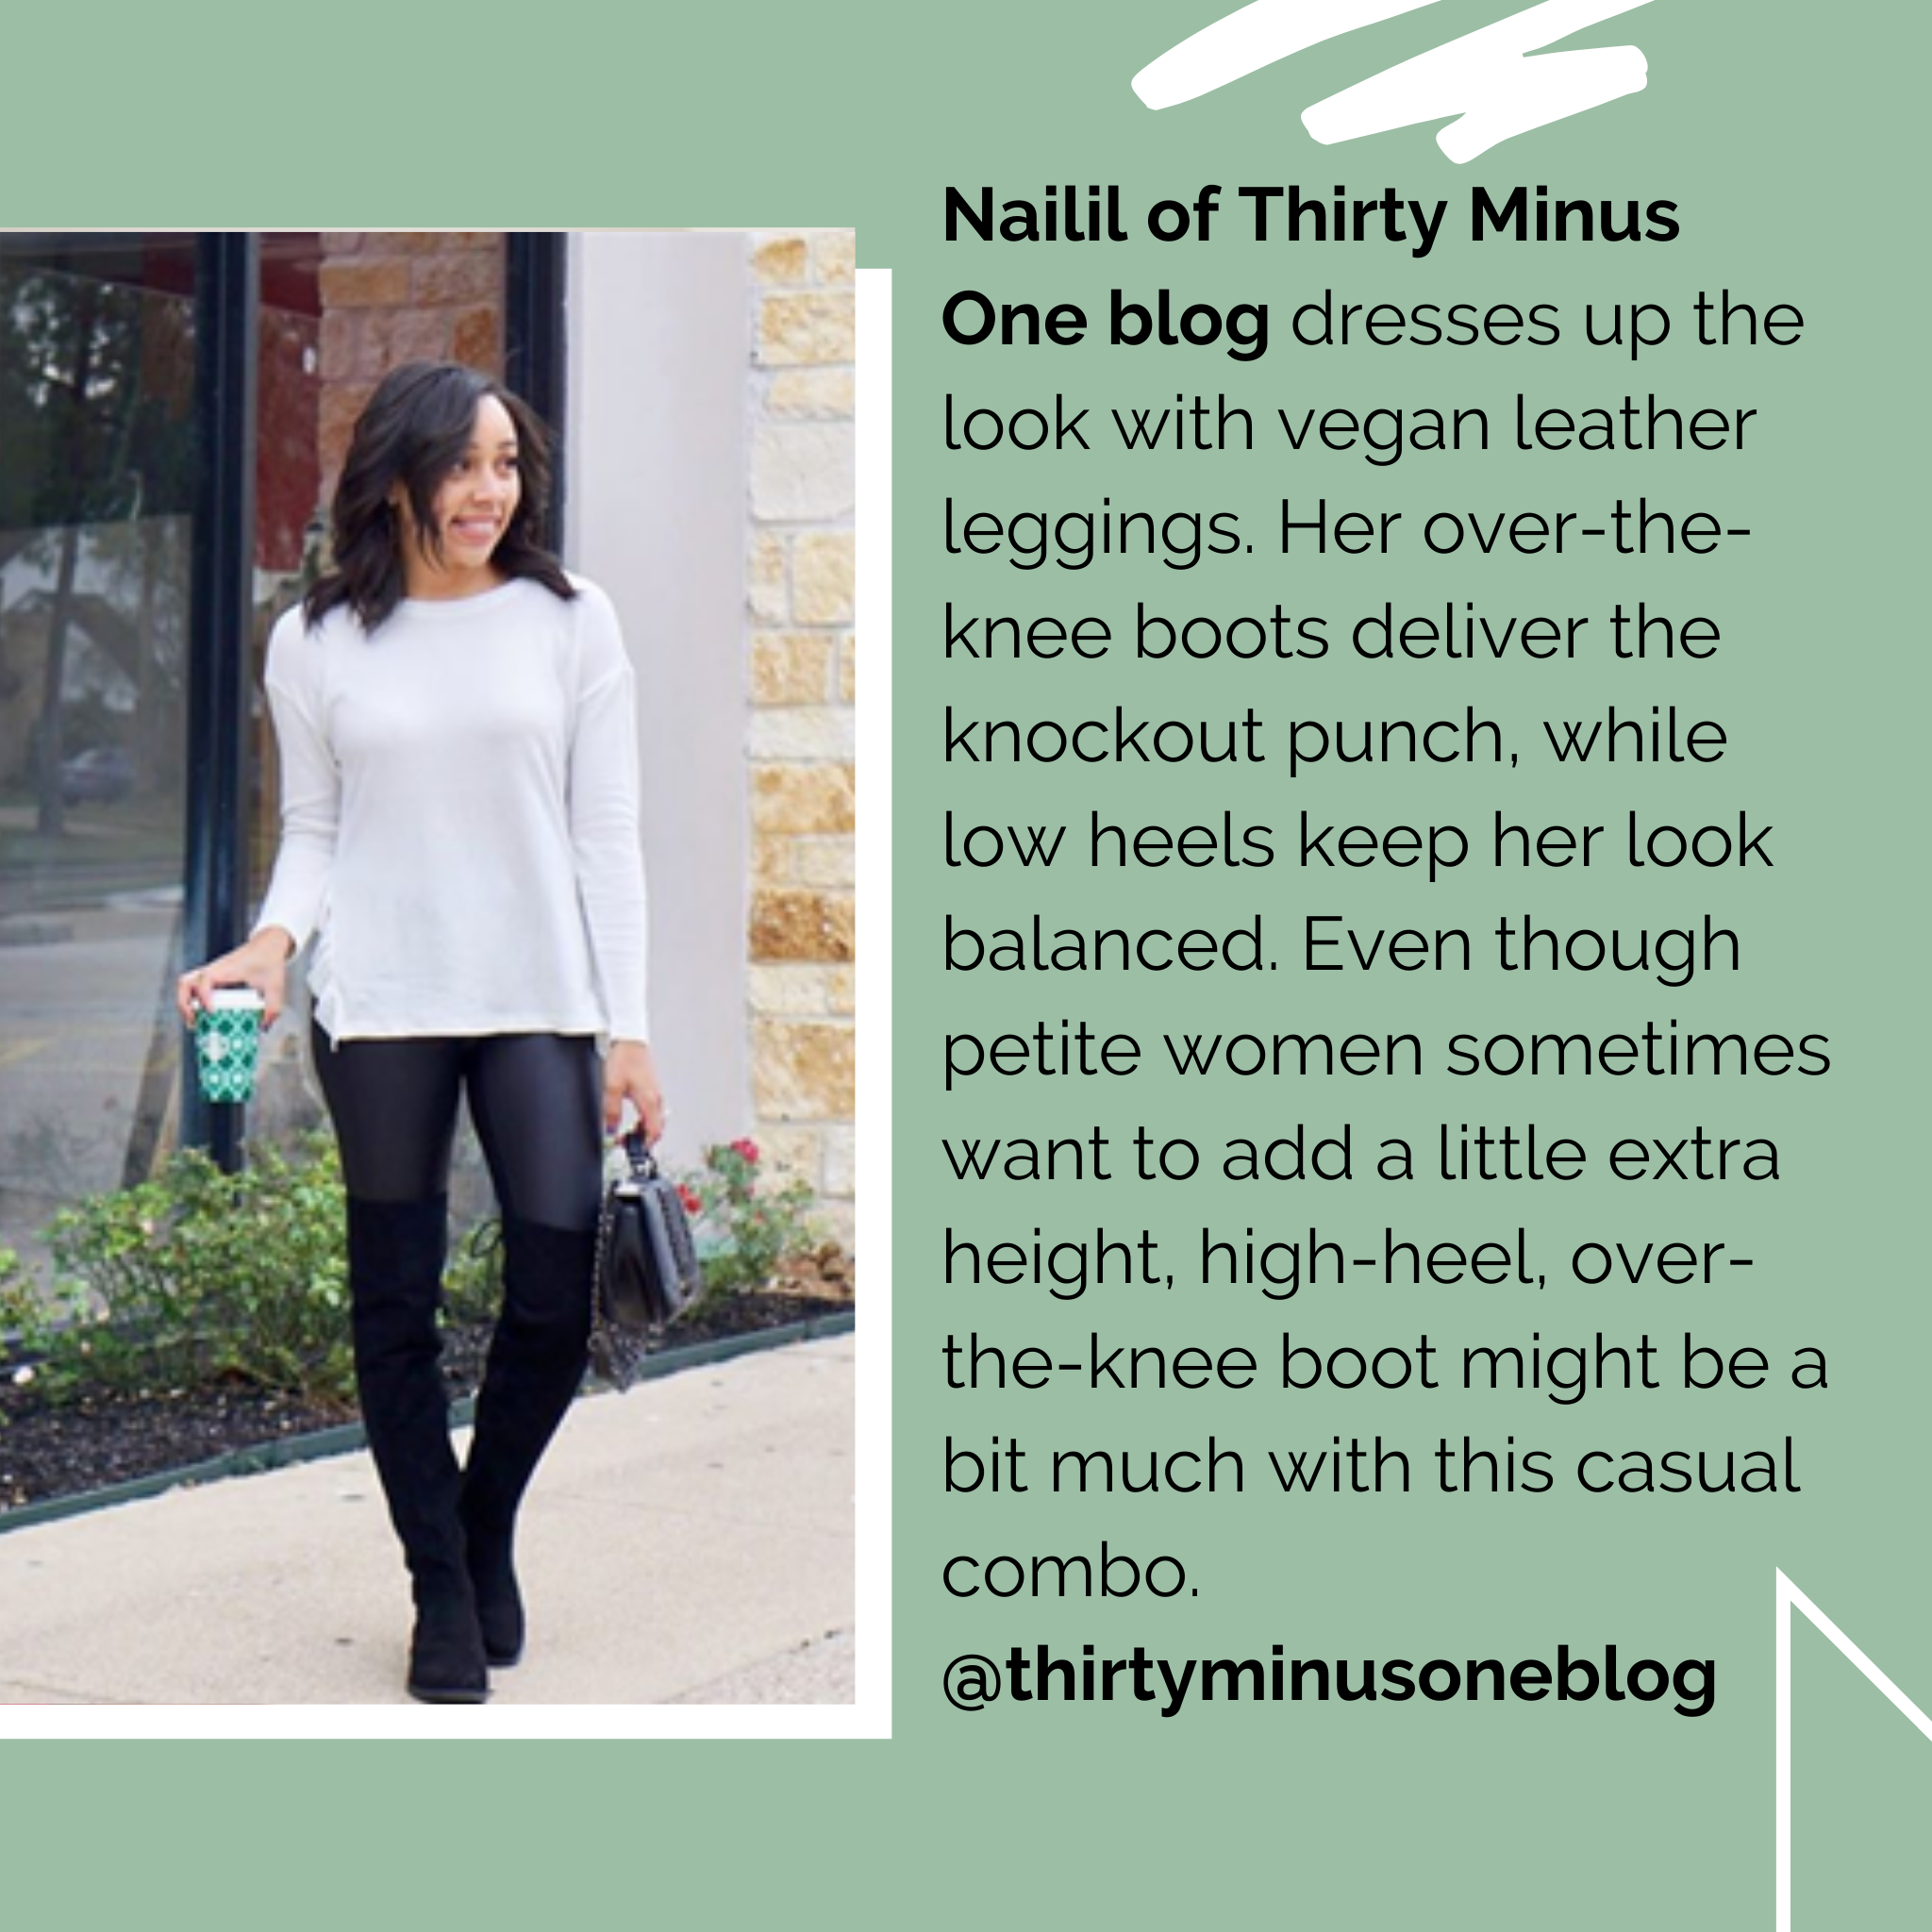 Nailil of Thirty Minus One blog dresses up the look with vegan leather leggings. Her over-the-knee boots deliver the knockout punch, while low heels keep her look balanced